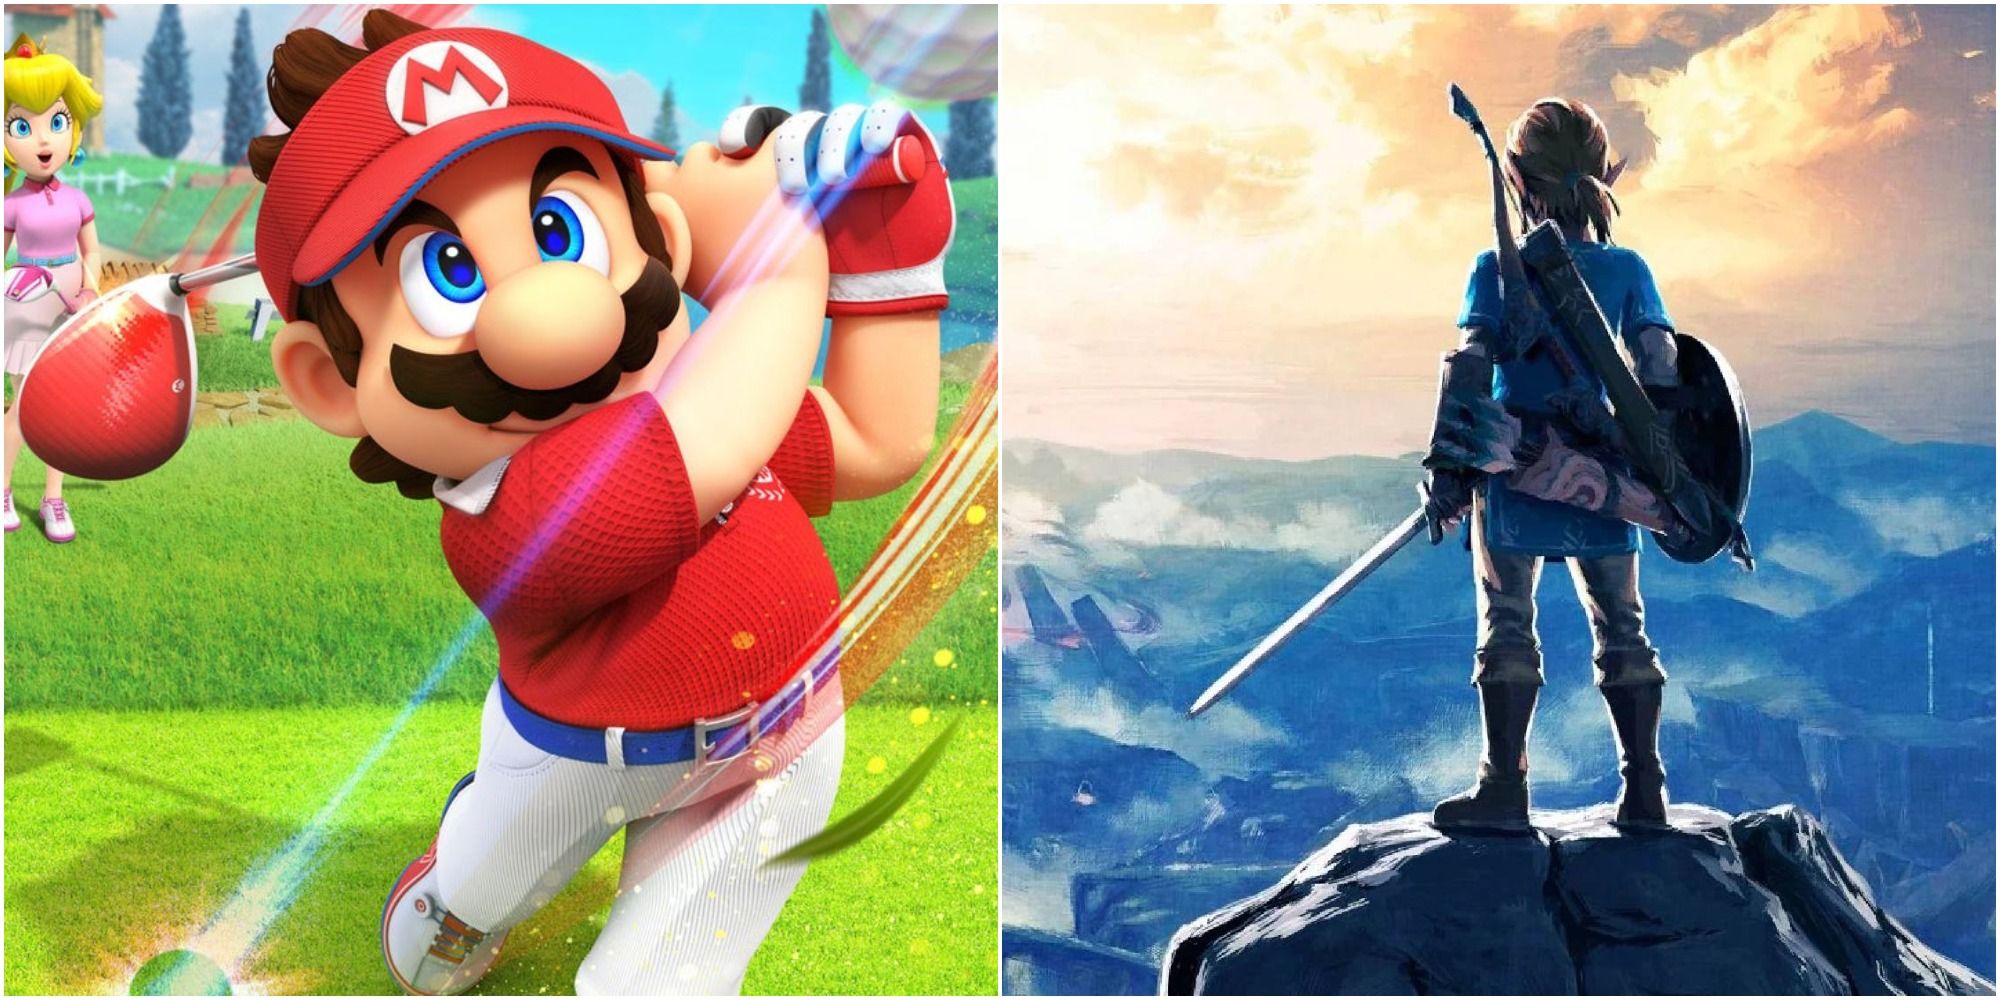 mario golf and breath of the wild